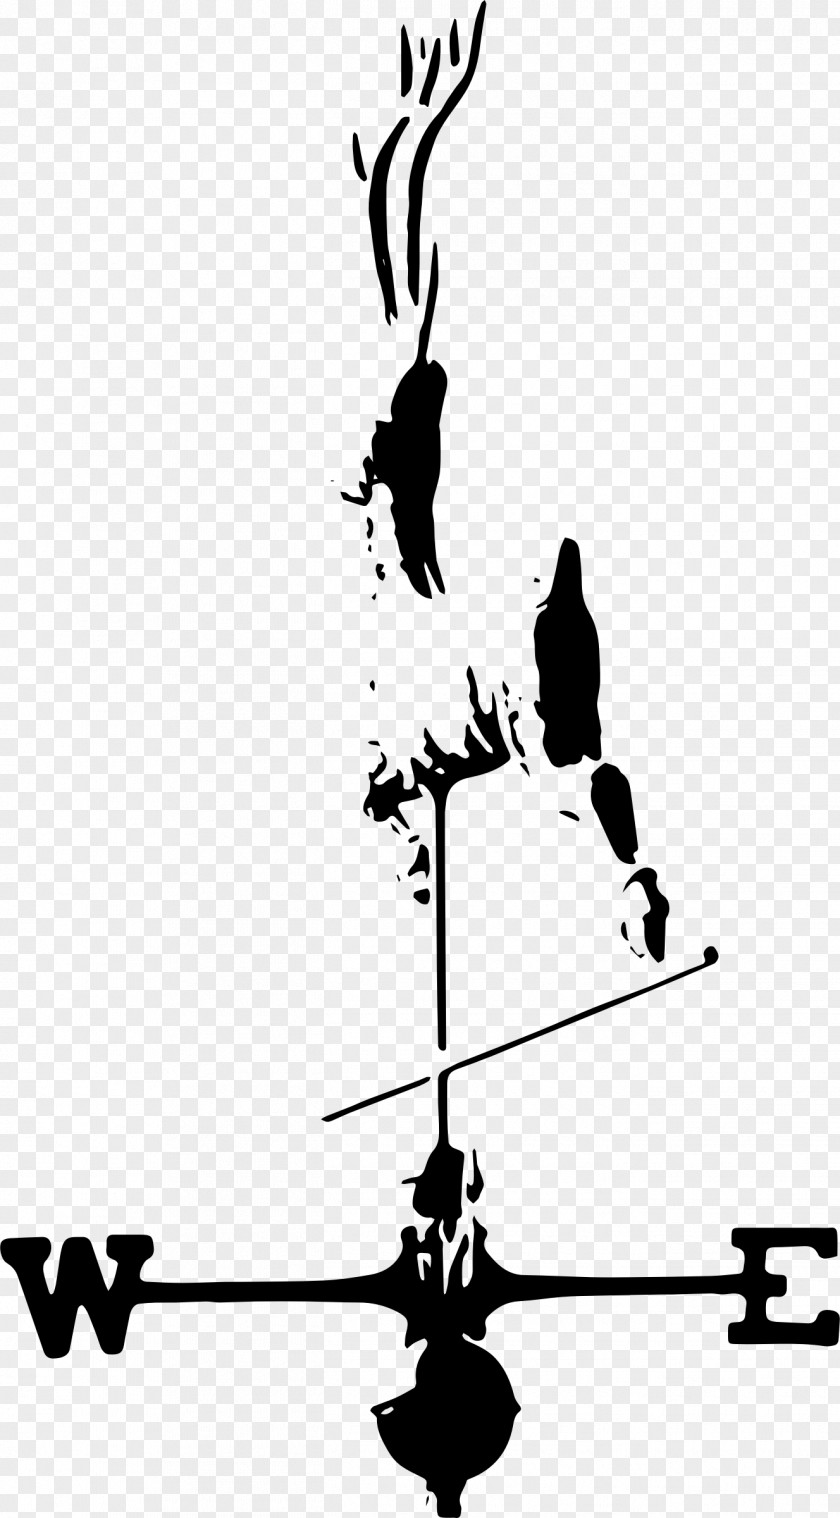 Large Deer Head Weather Vane Roof Point Architectural Engineering Clip Art PNG